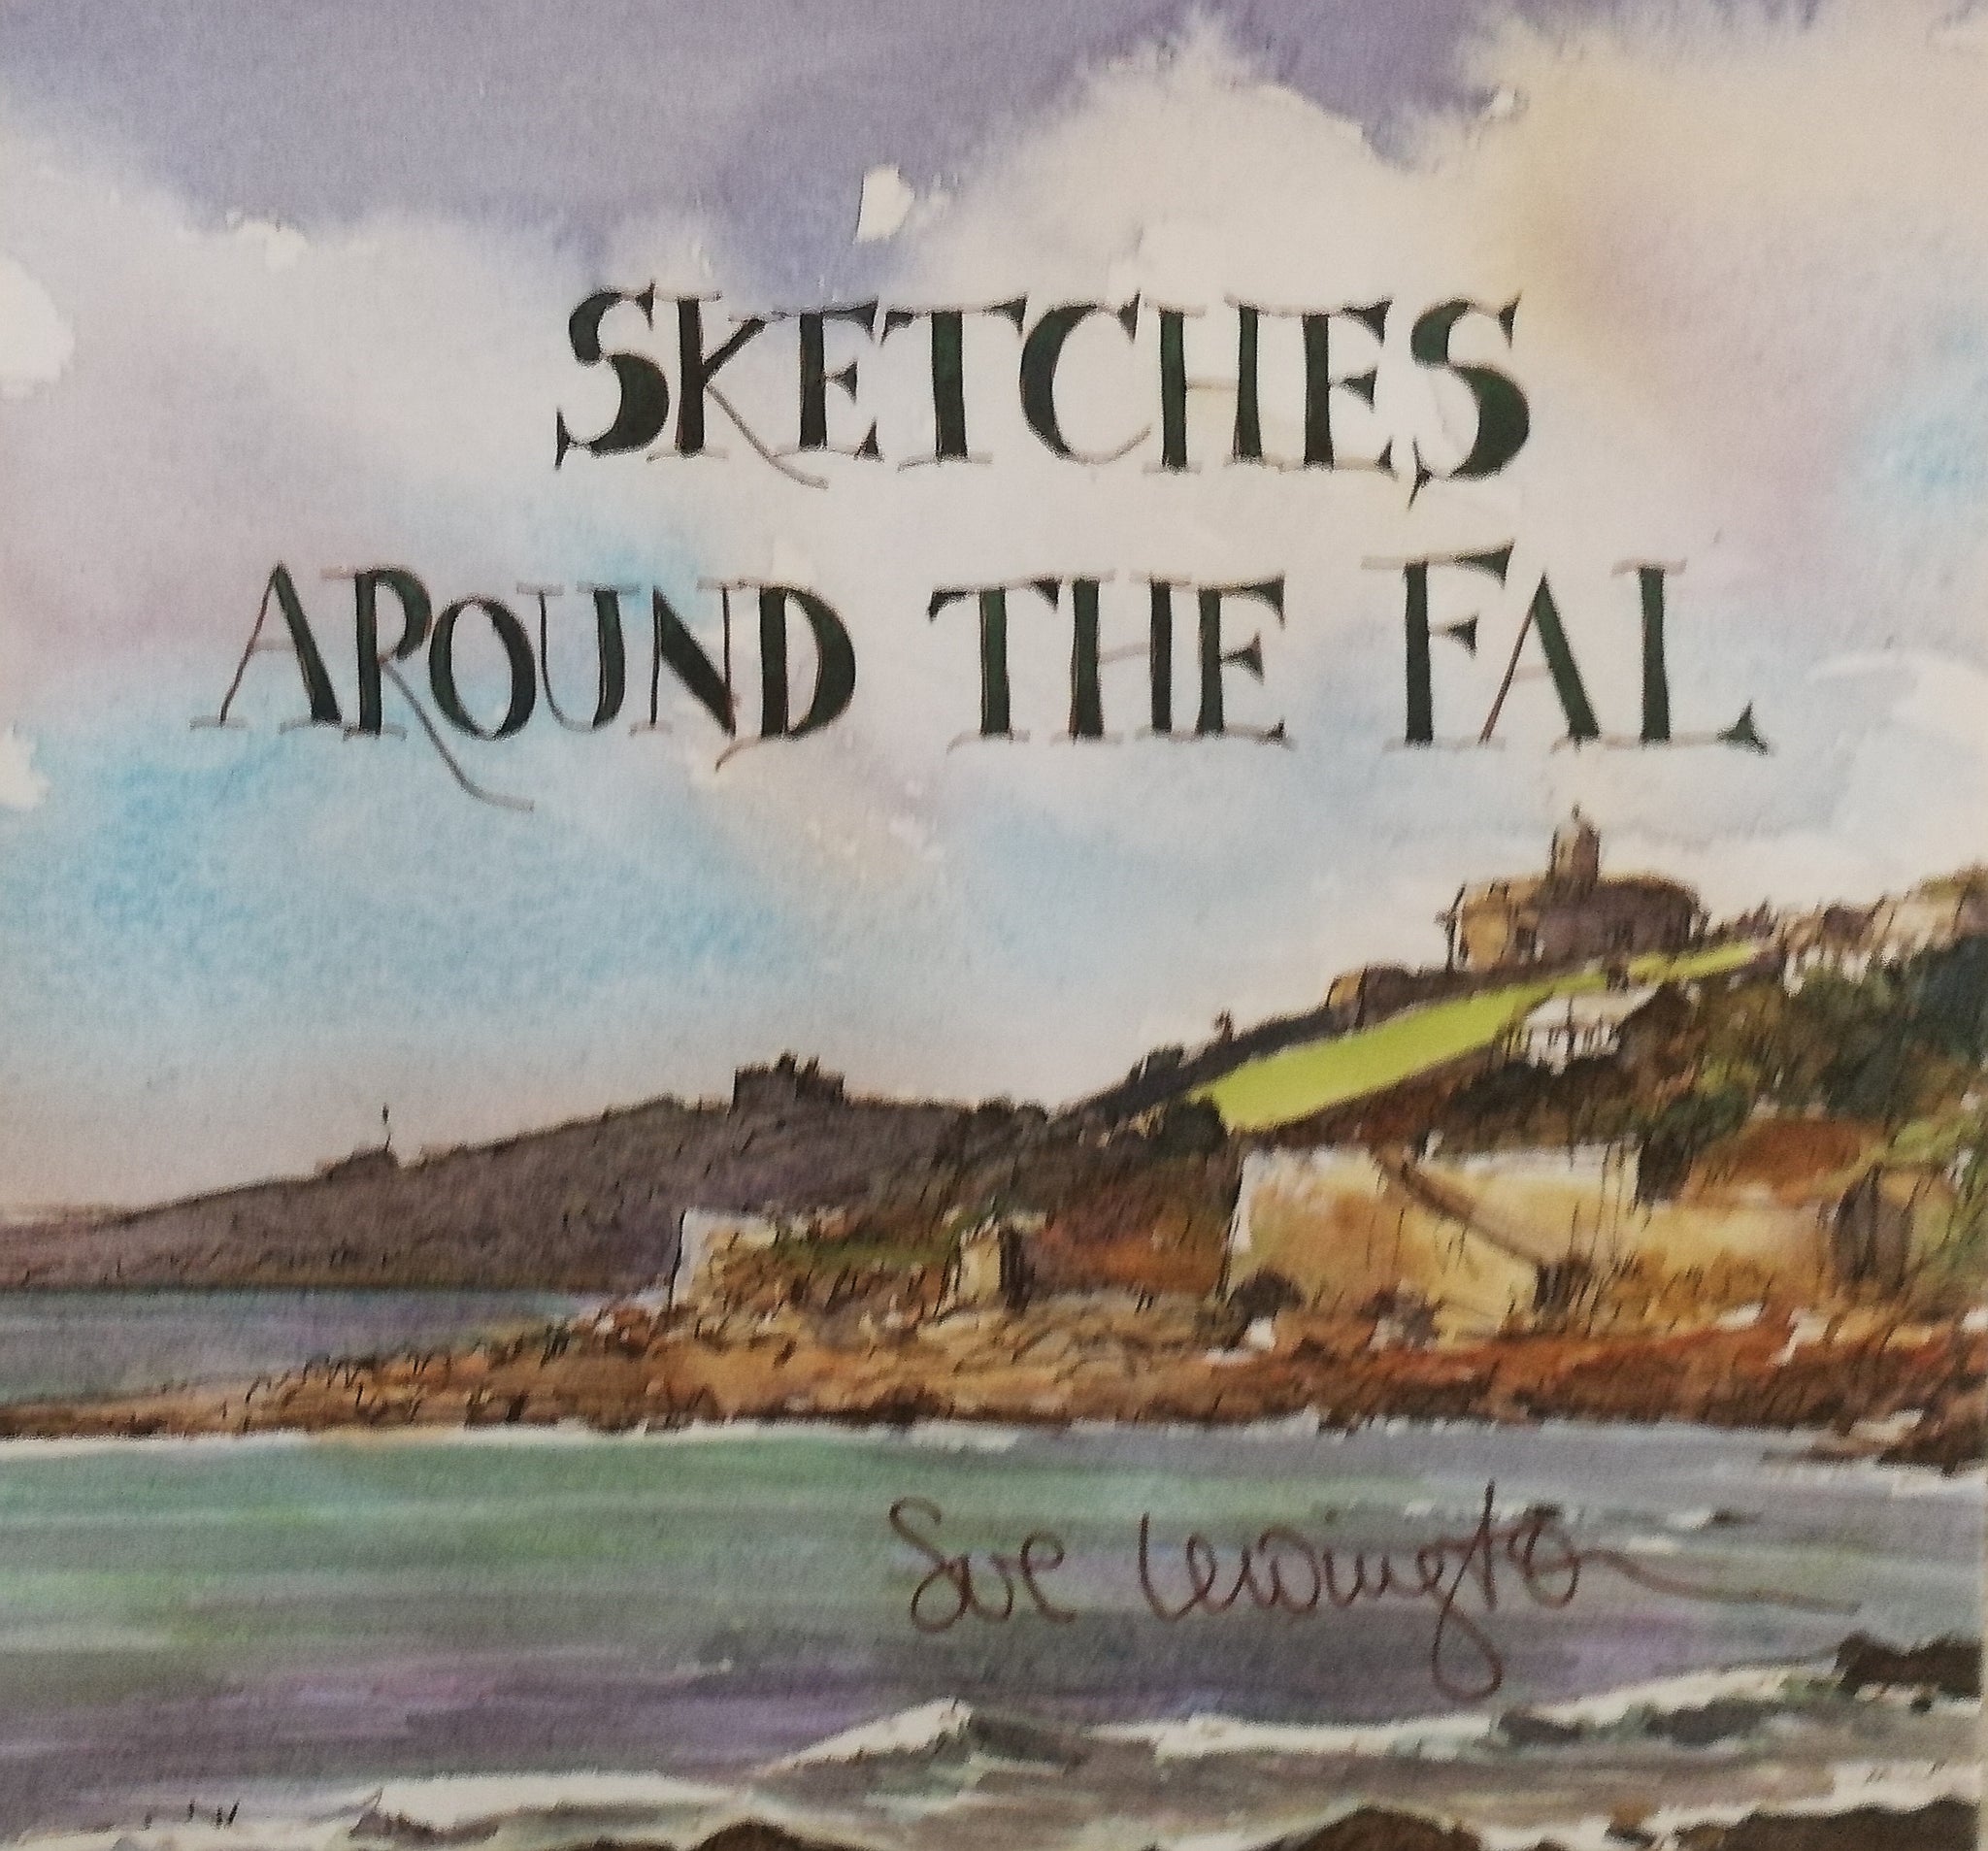 Sketches around the Fal